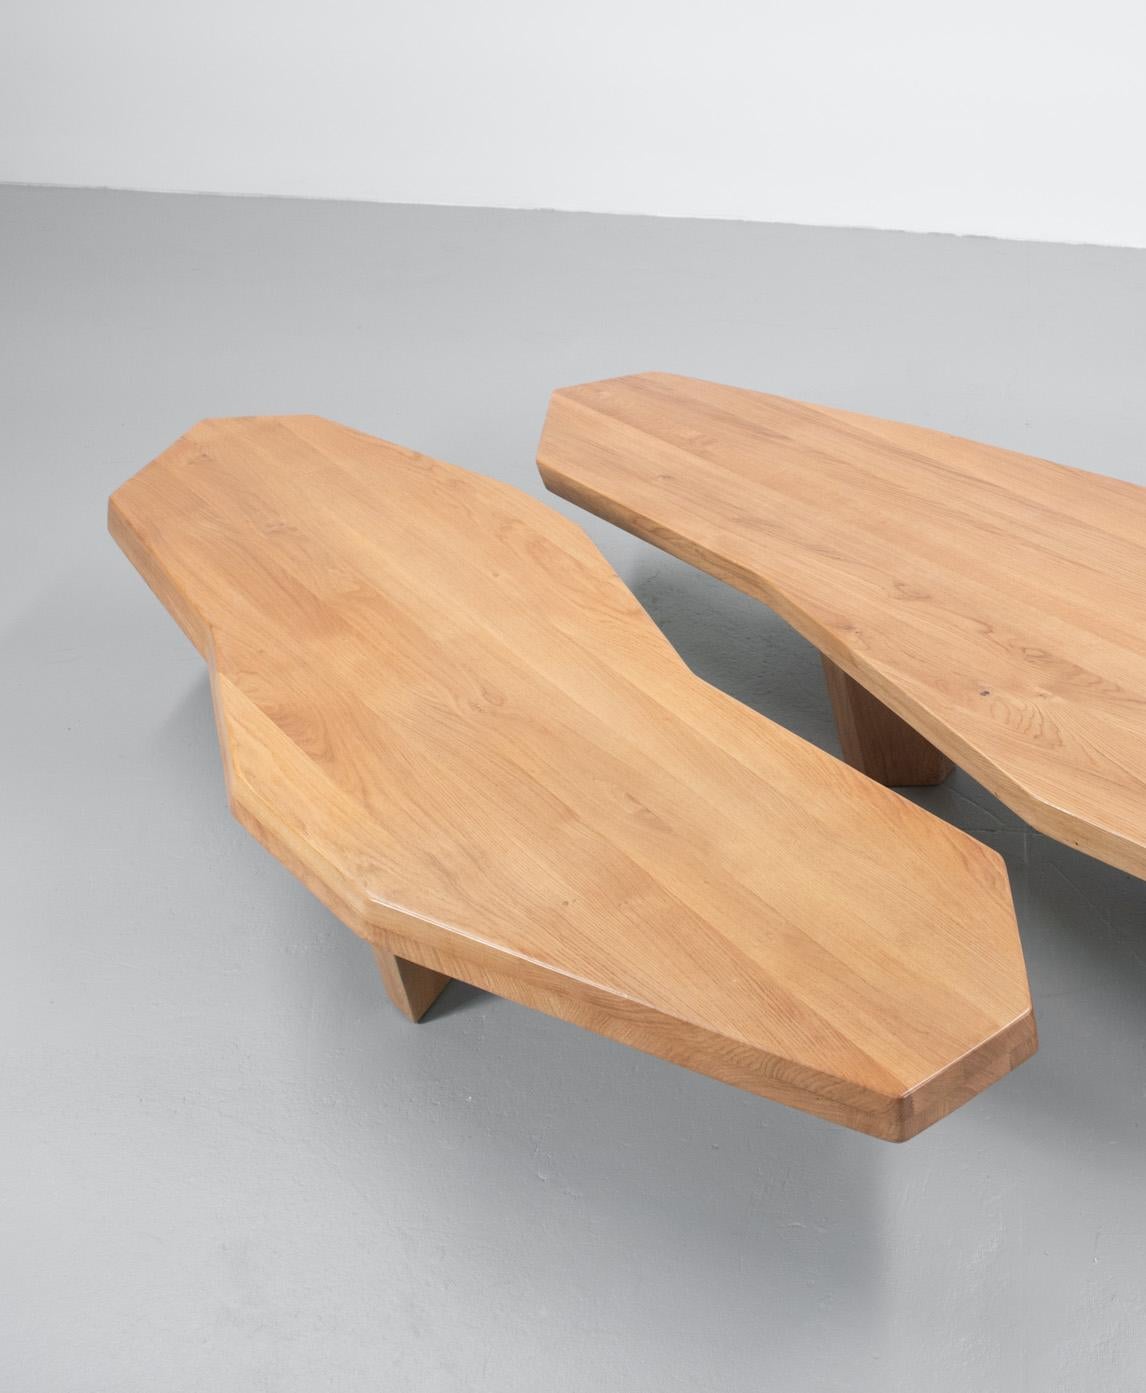 Coffee tables in oak. The angular shapes are cut at angles on the edges so the lines seem to prolong in space. The 
The legs feel animated.